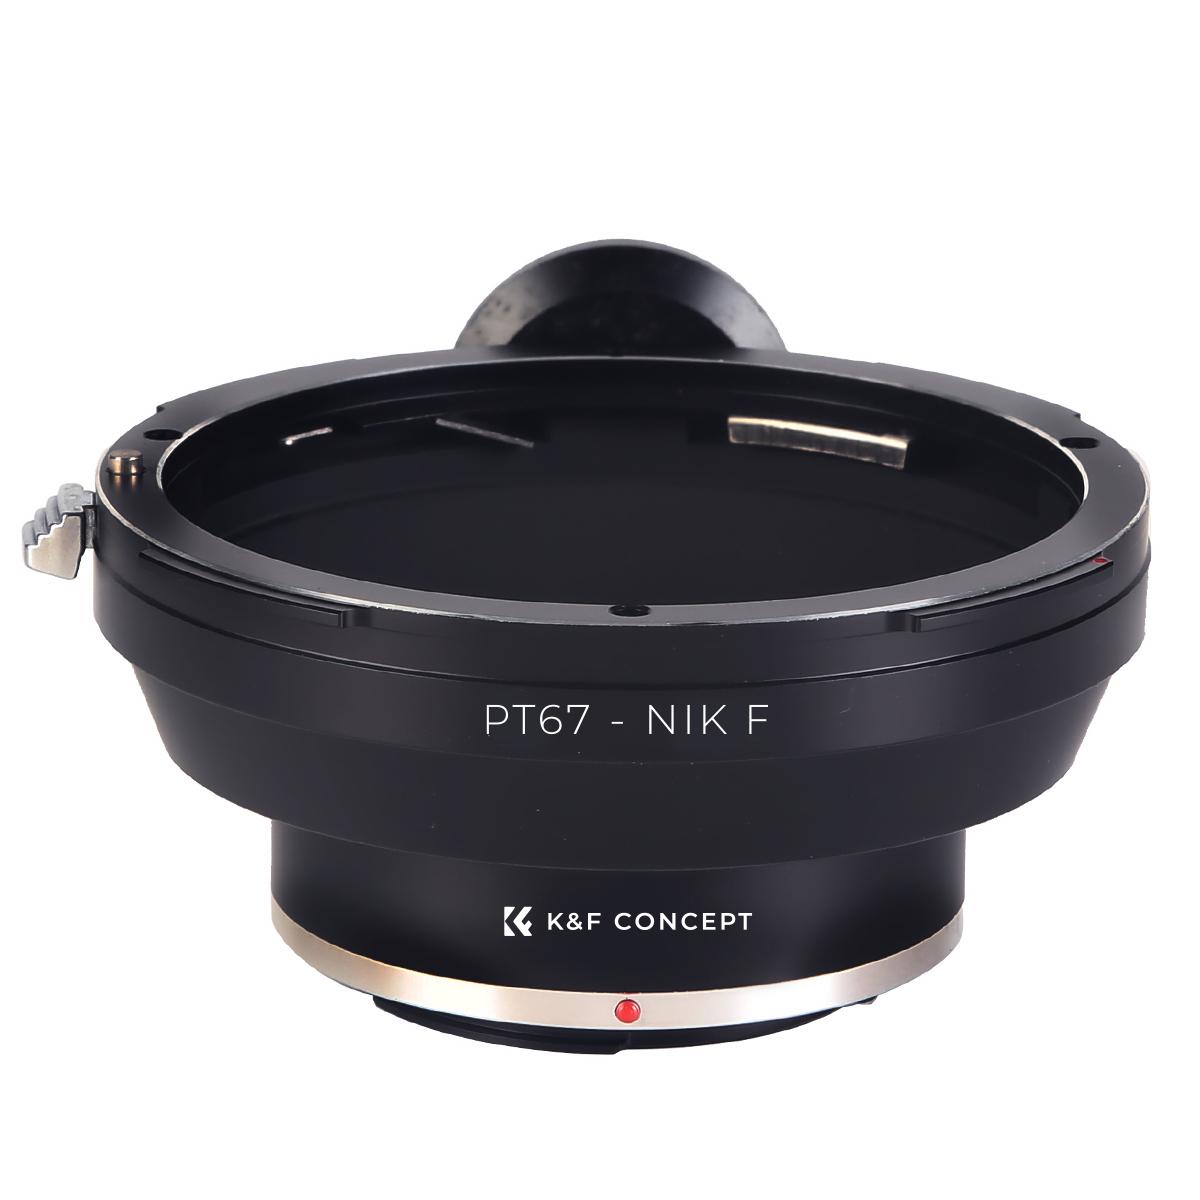 K&F Concept M34171 Pentax 67 Lenses to Nikon F Lens Mount Adapter with tripod mount